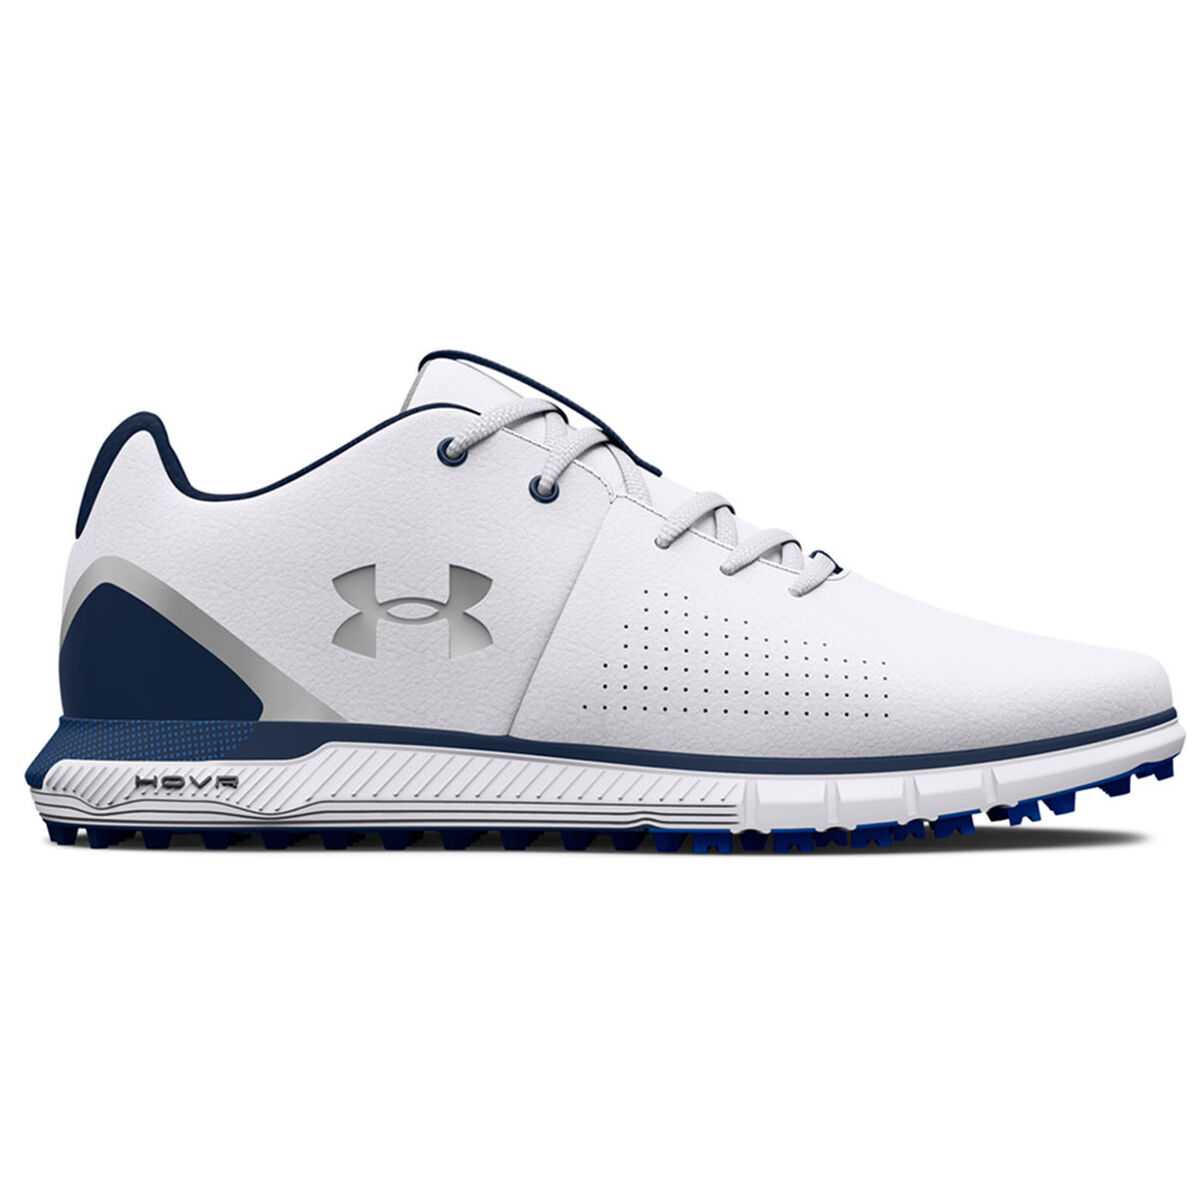 Under Armour Men’s HOVR Fade 2 Spikeless Golf Shoes, Mens, White/academy/academy, 9 | American Golf